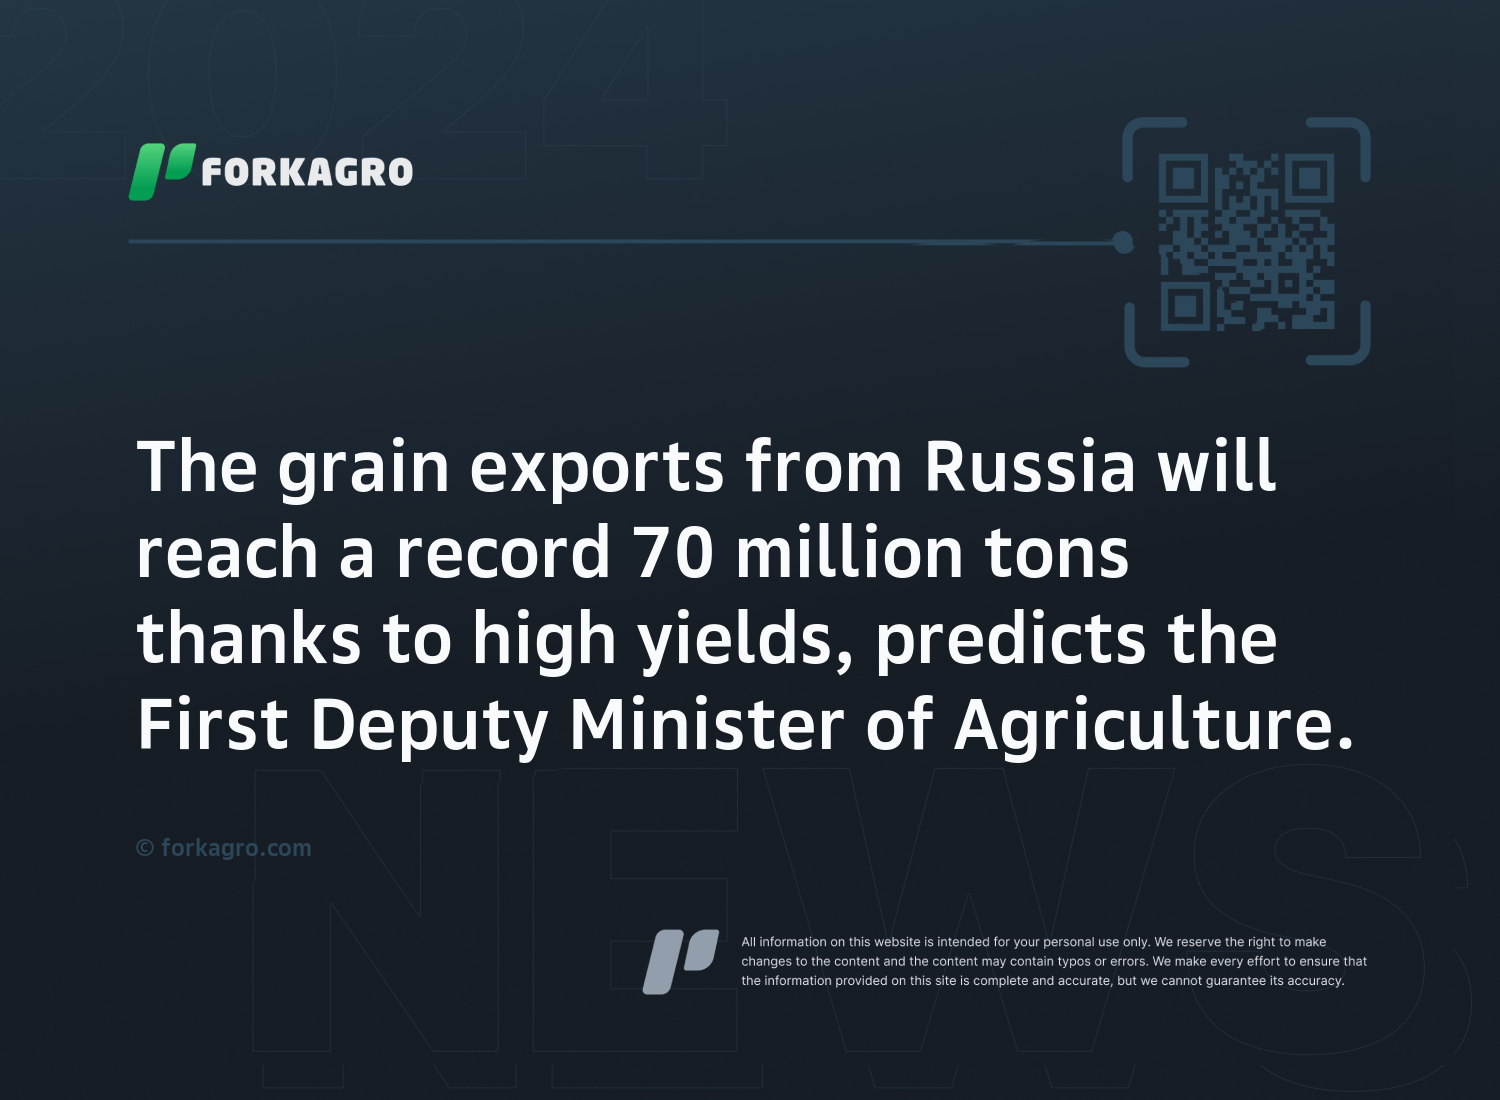 The grain exports from Russia will reach a record 70 million tons thanks to high yields, predicts the First Deputy Minister of Agriculture.